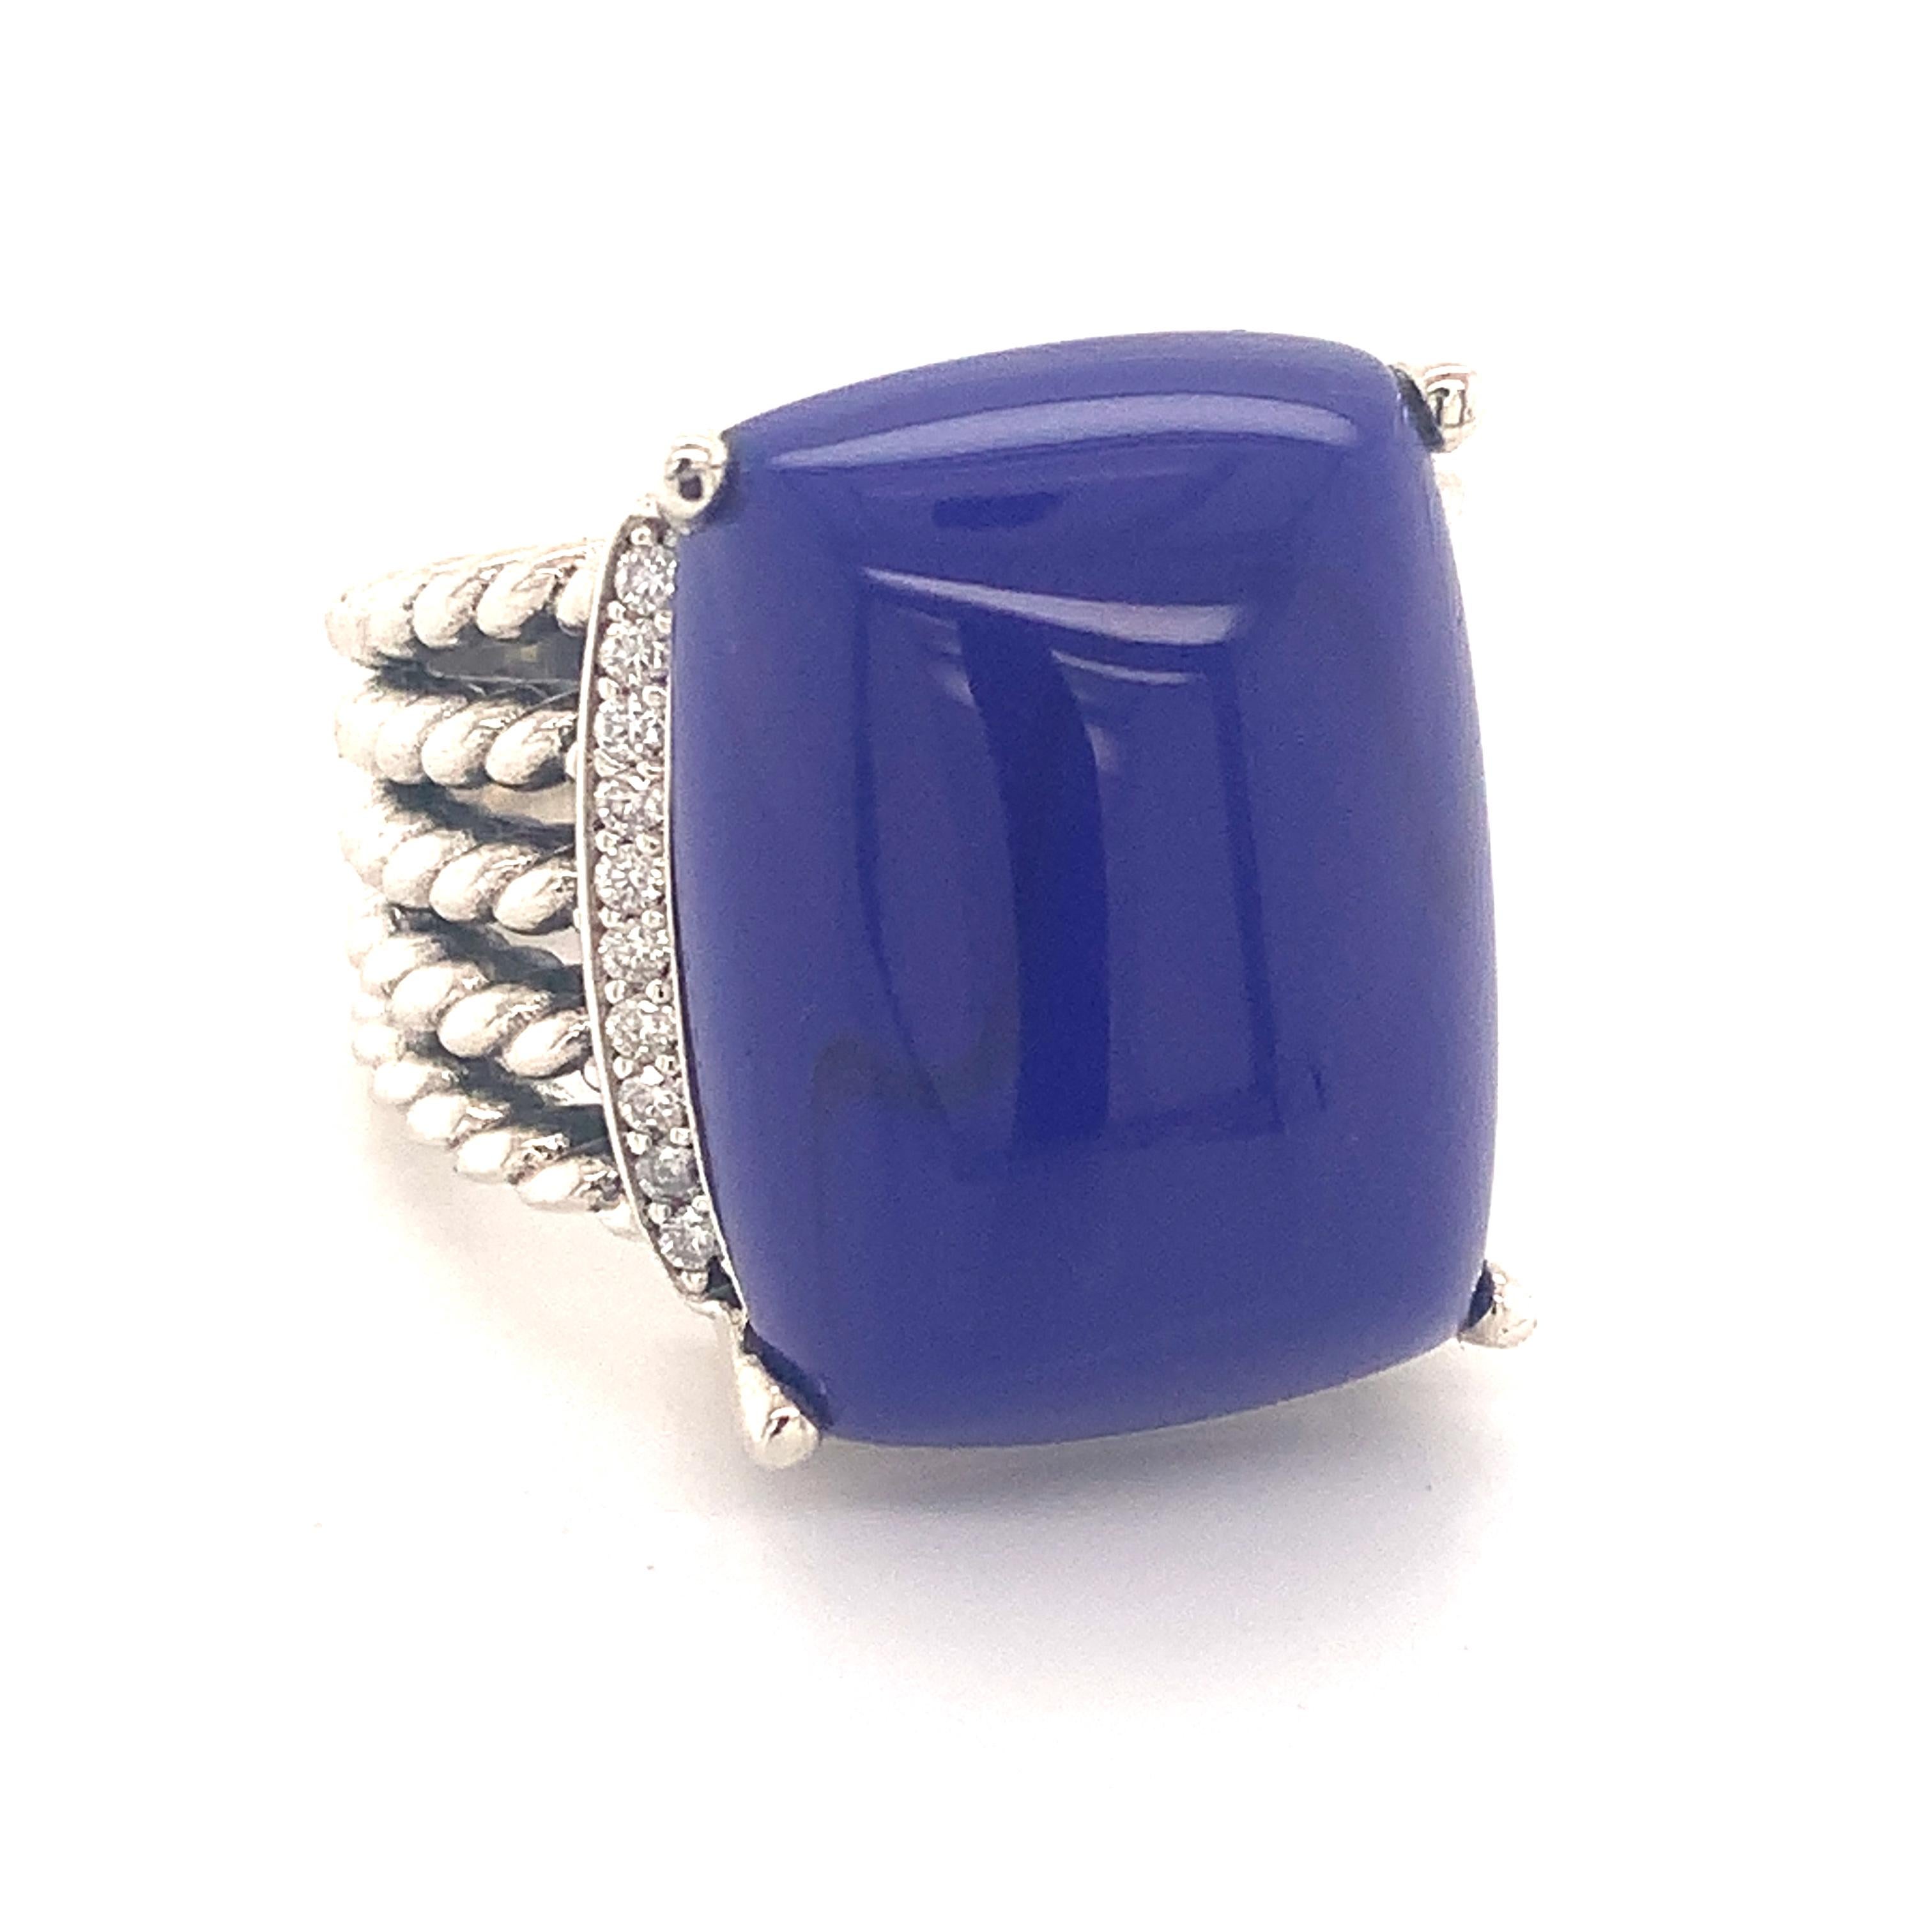 David Yurman Estate Silver Lapis Lazuli Diamond Ring Size 7.75 12.4 Grams DY9

TRUSTED SELLER SINCE 2002

PLEASE SEE OUR HUNDREDS OF POSITIVE FEEDBACKS FROM OUR CLIENTS!!

FREE SHIPPING

This elegant Authentic David Yurman sterling silver lapis